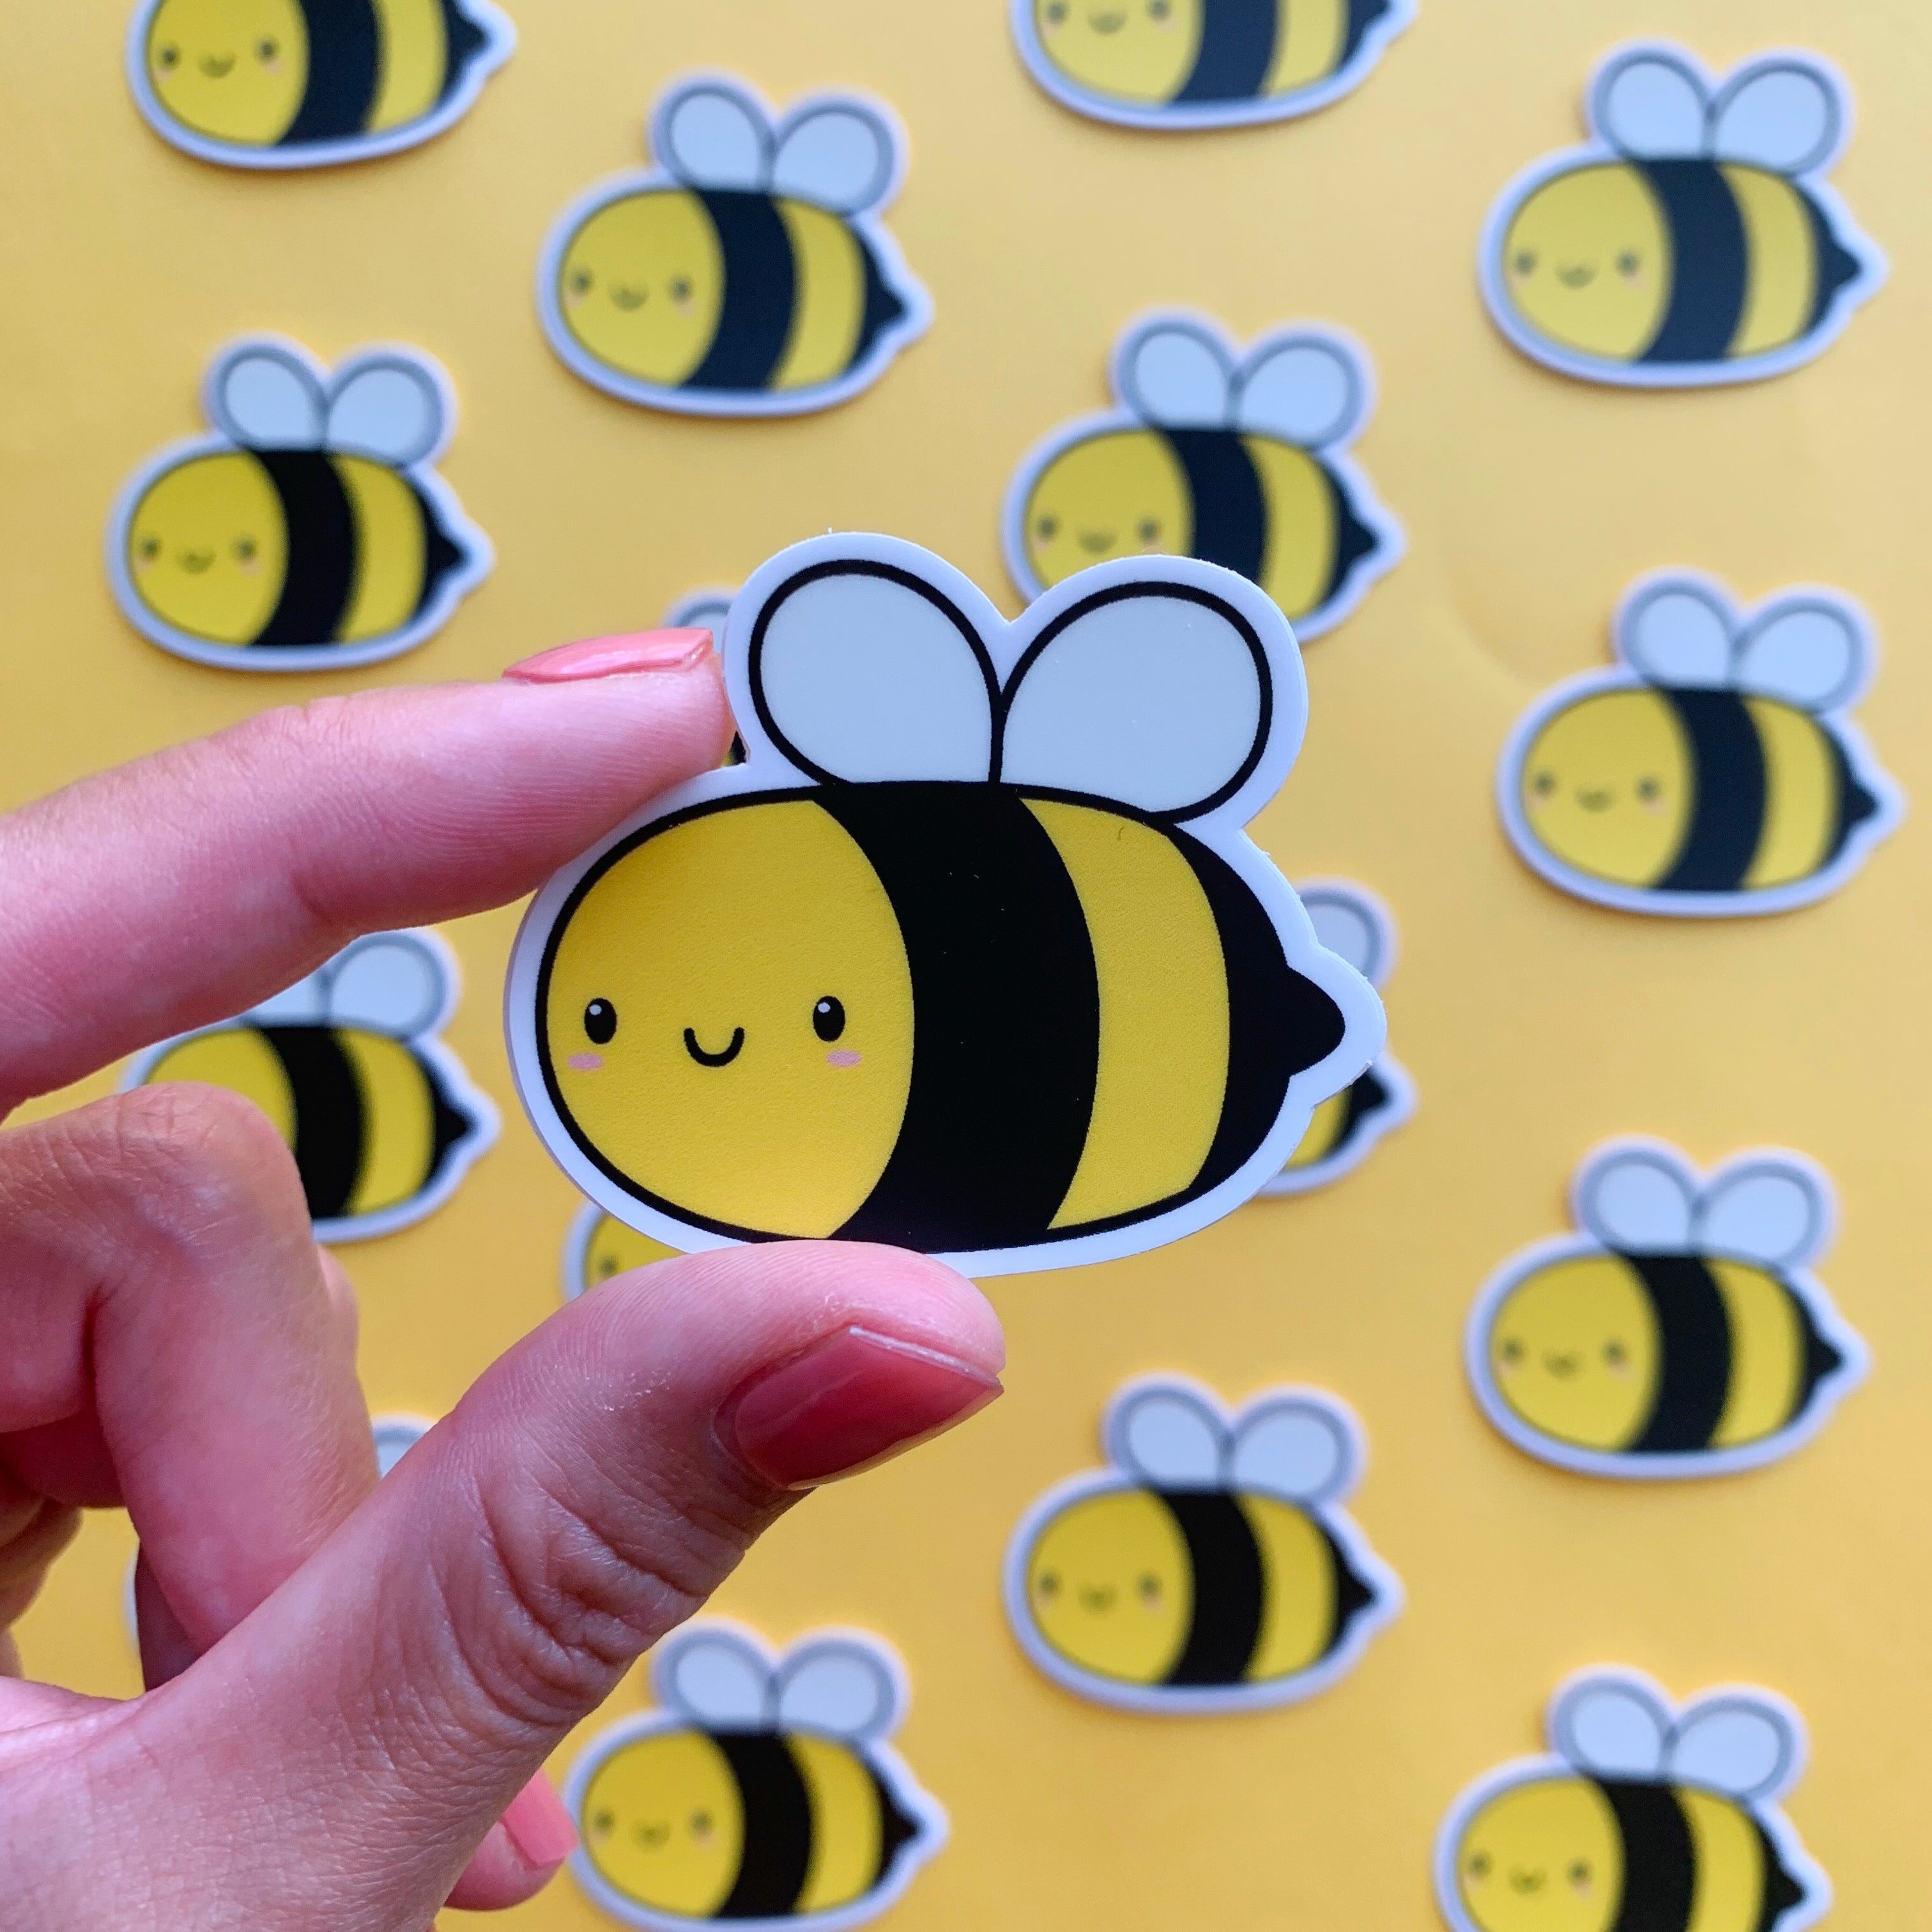 Bumble Bee Sticker